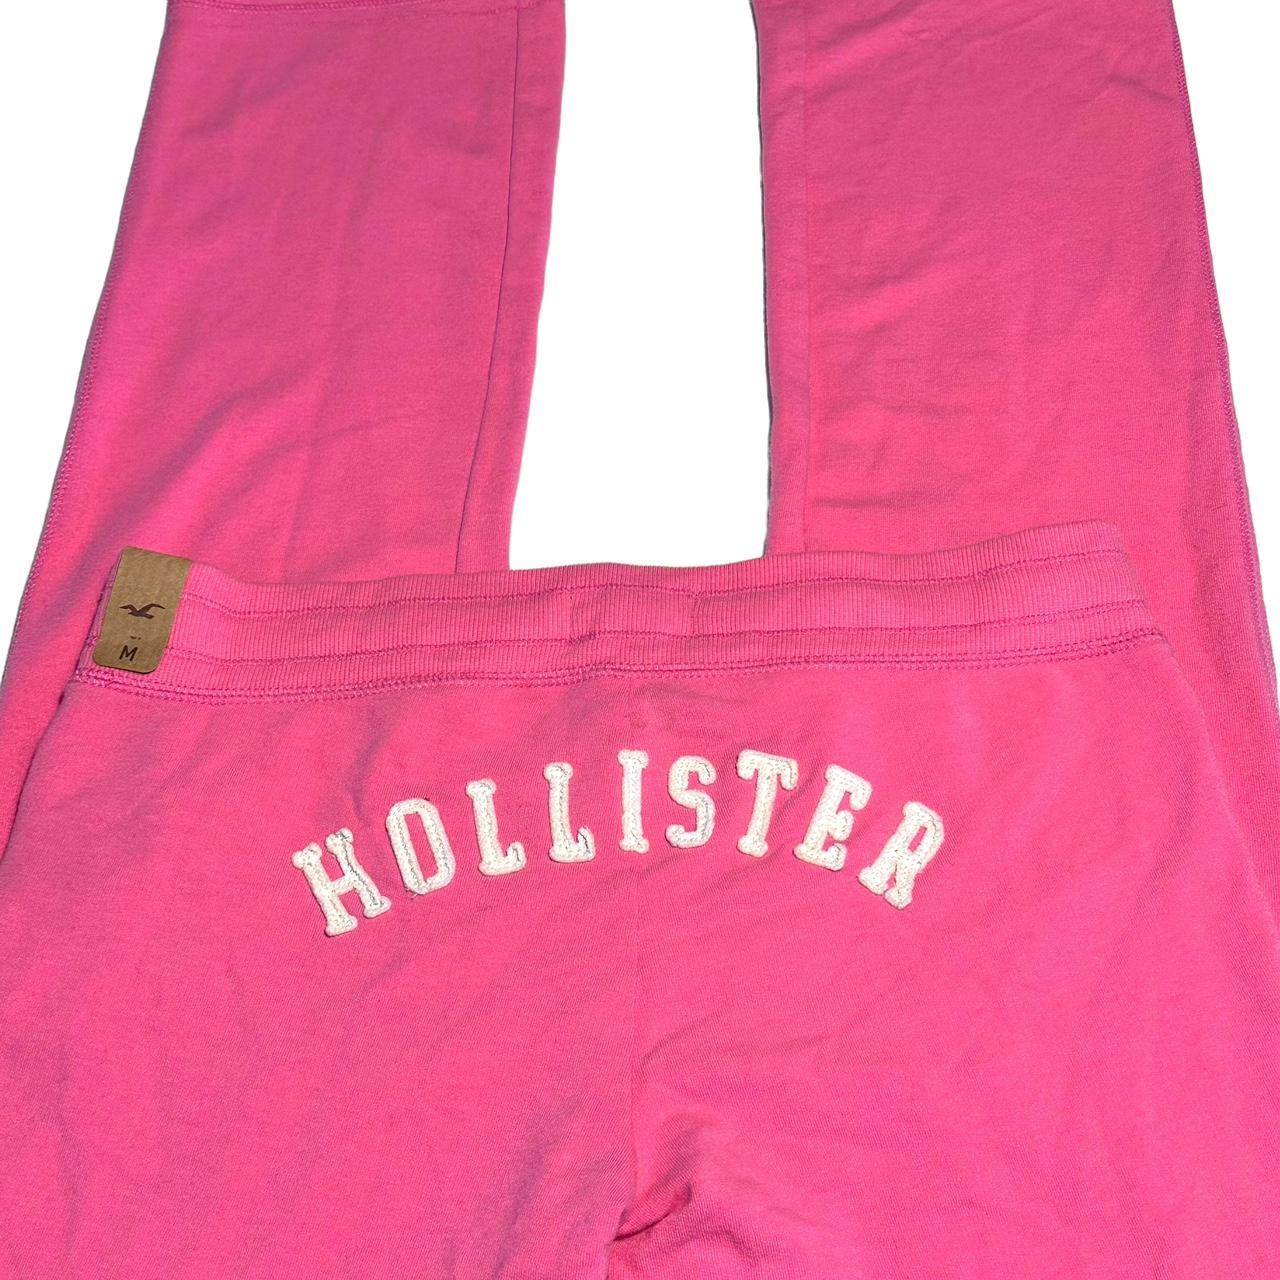 vintage hollister sweatpants from the early 2010s - Depop